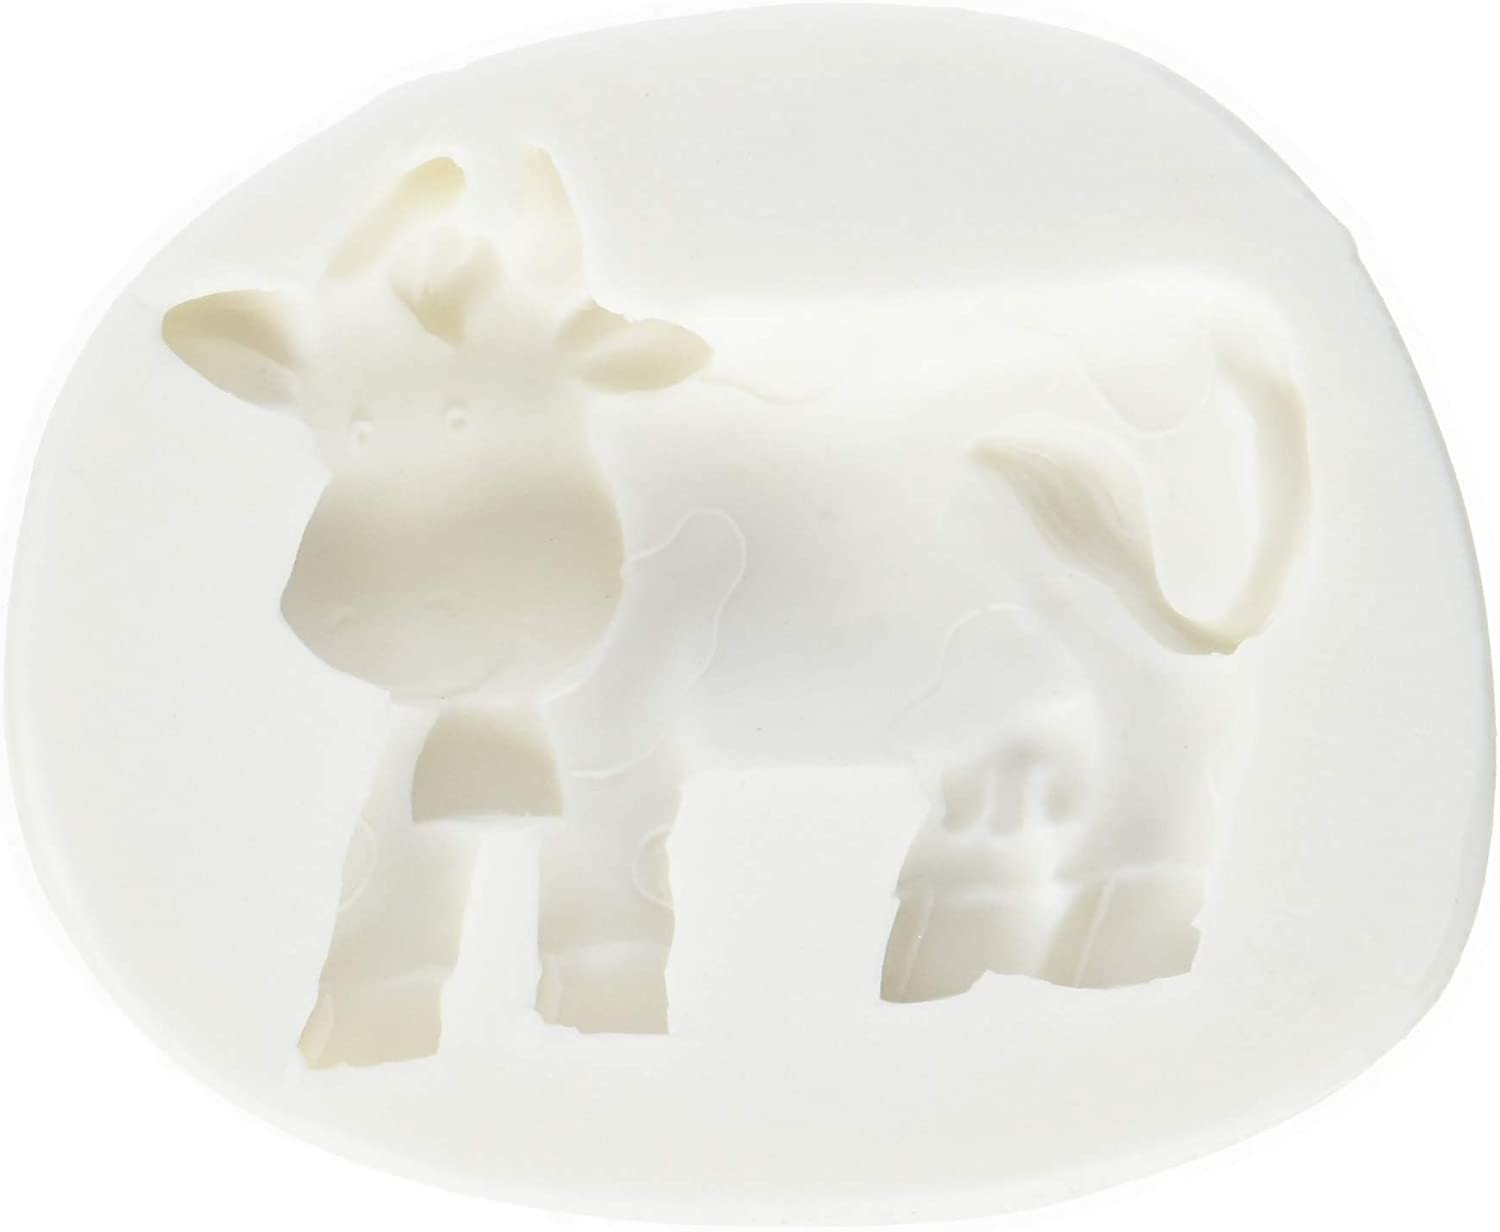 \'Städter 257467 Flexible Silicone Mould – Model Cow, White, 7 x 5.5 x 3 cm